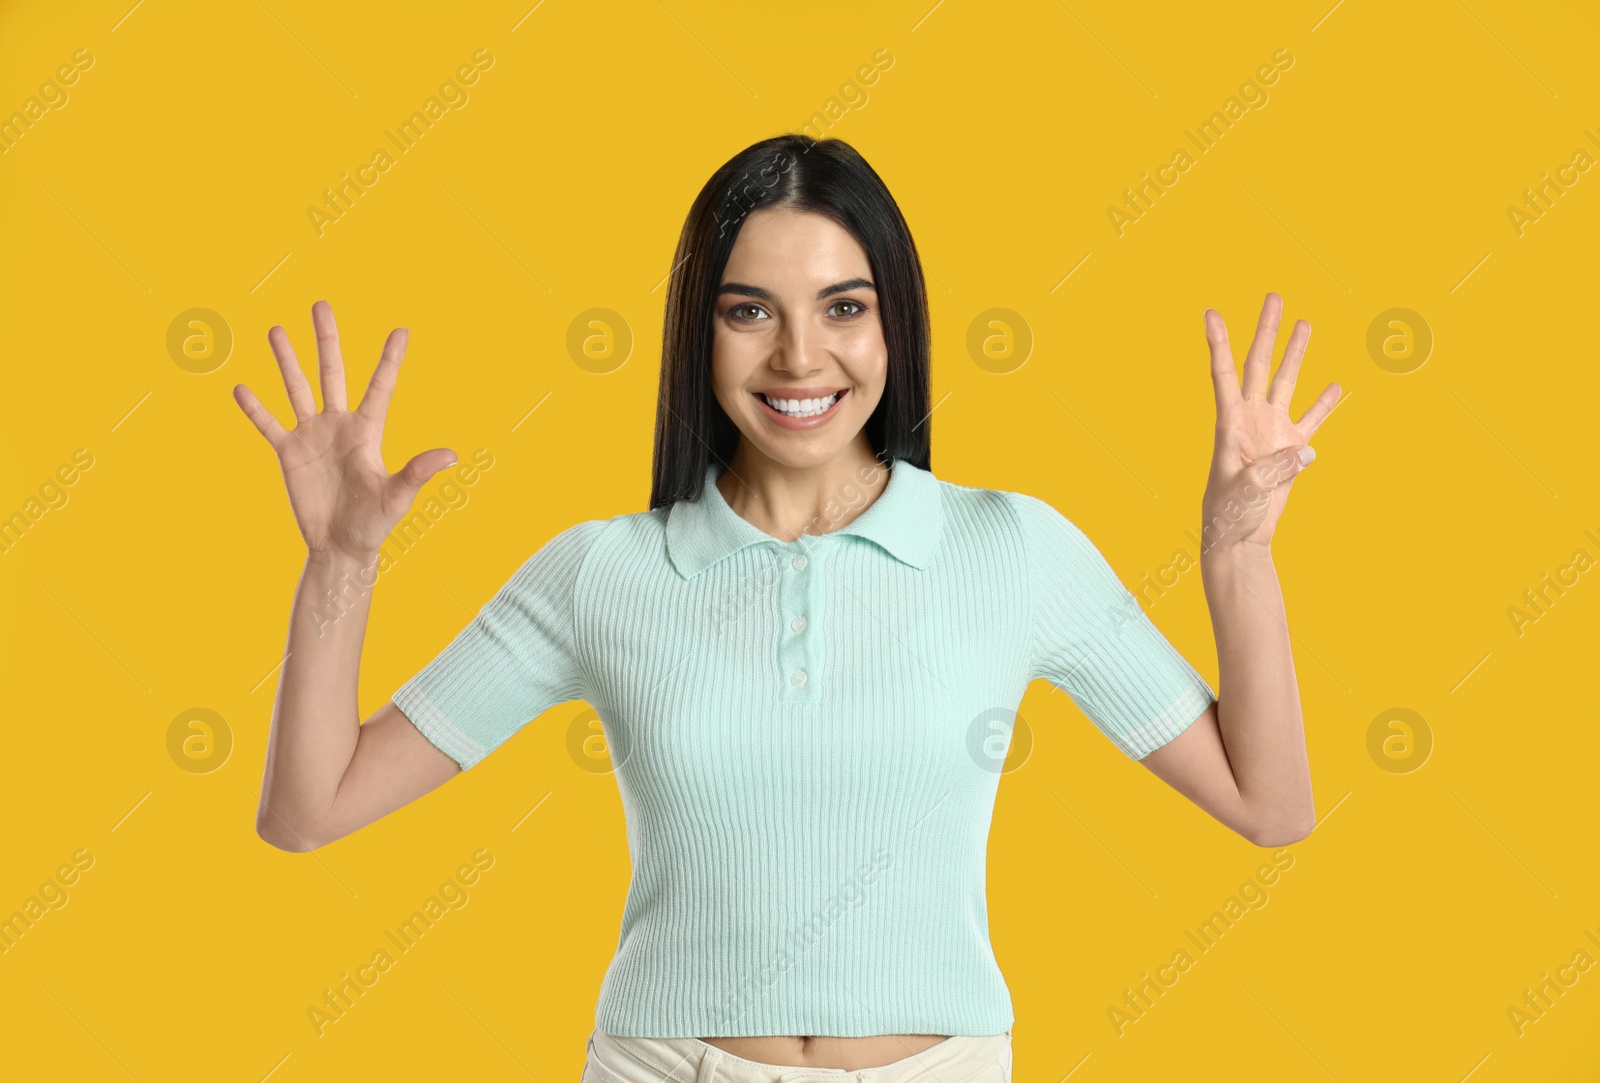 Photo of Woman showing number nine with her hands on yellow background